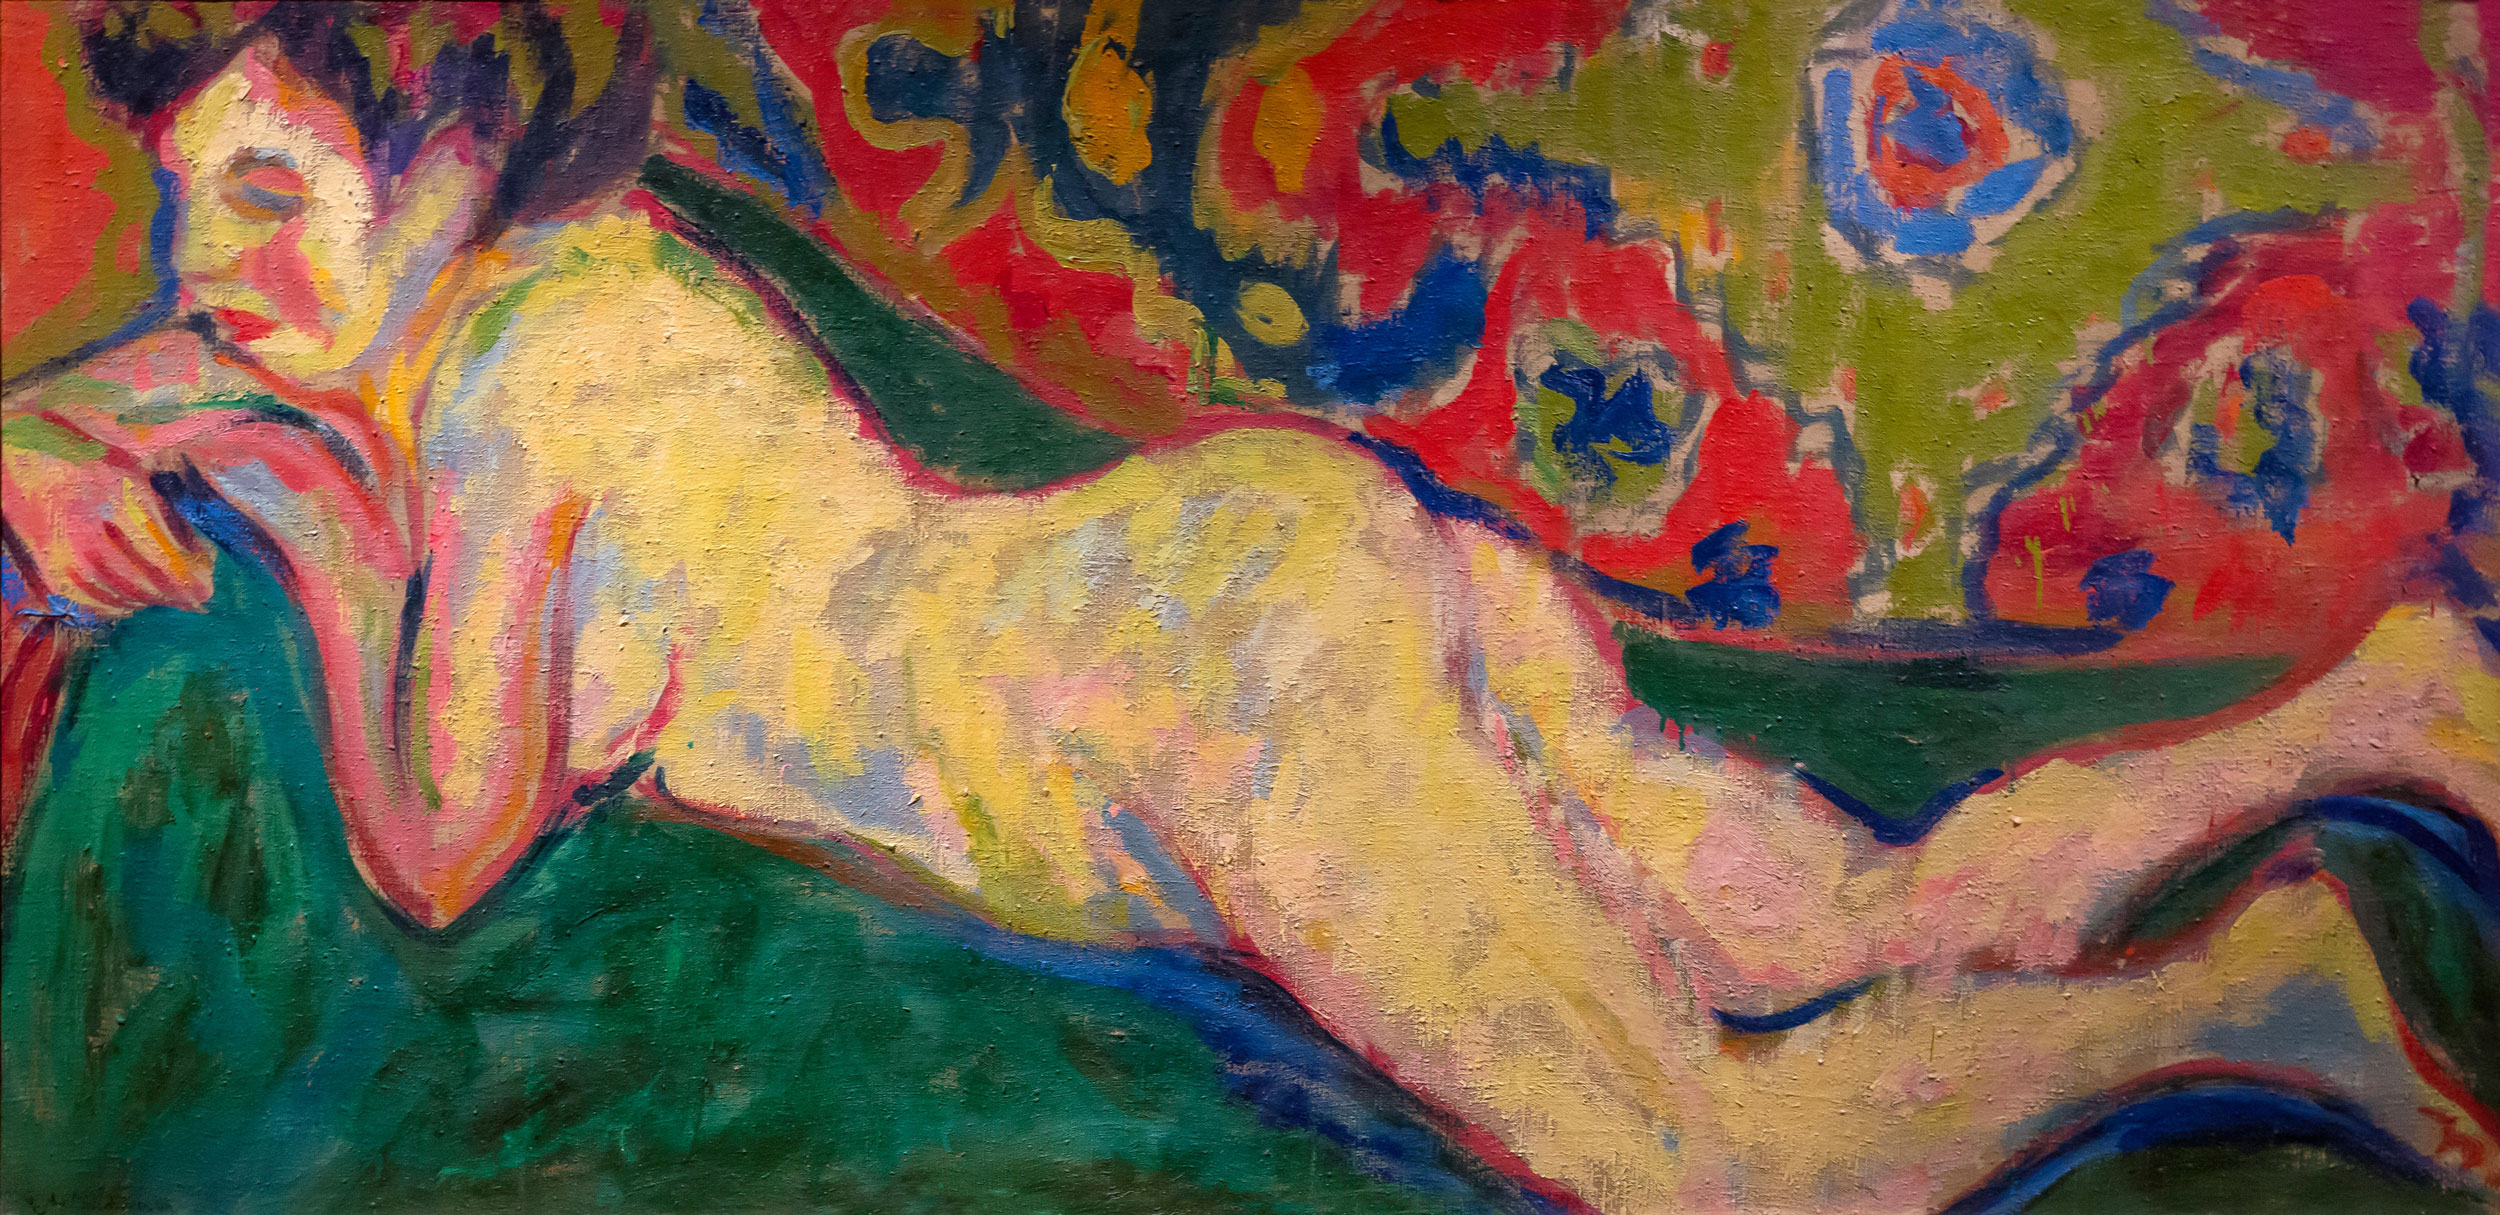 Ernst Ludwig Kirchner - Reclining Nude, 1909